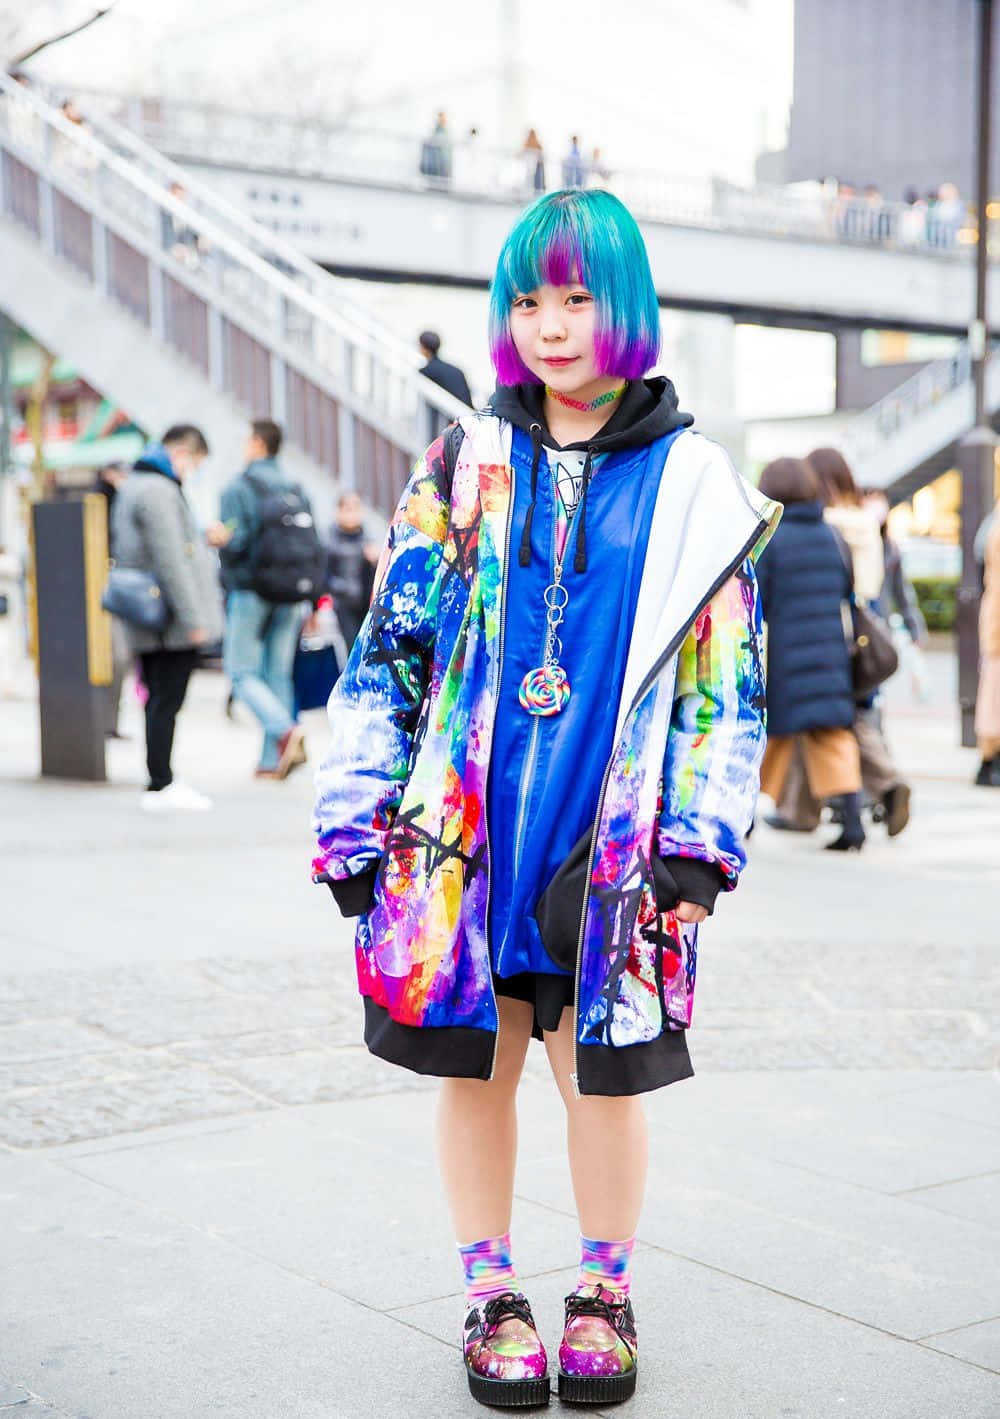 A Girl With Colorful Hair Standing On The Street